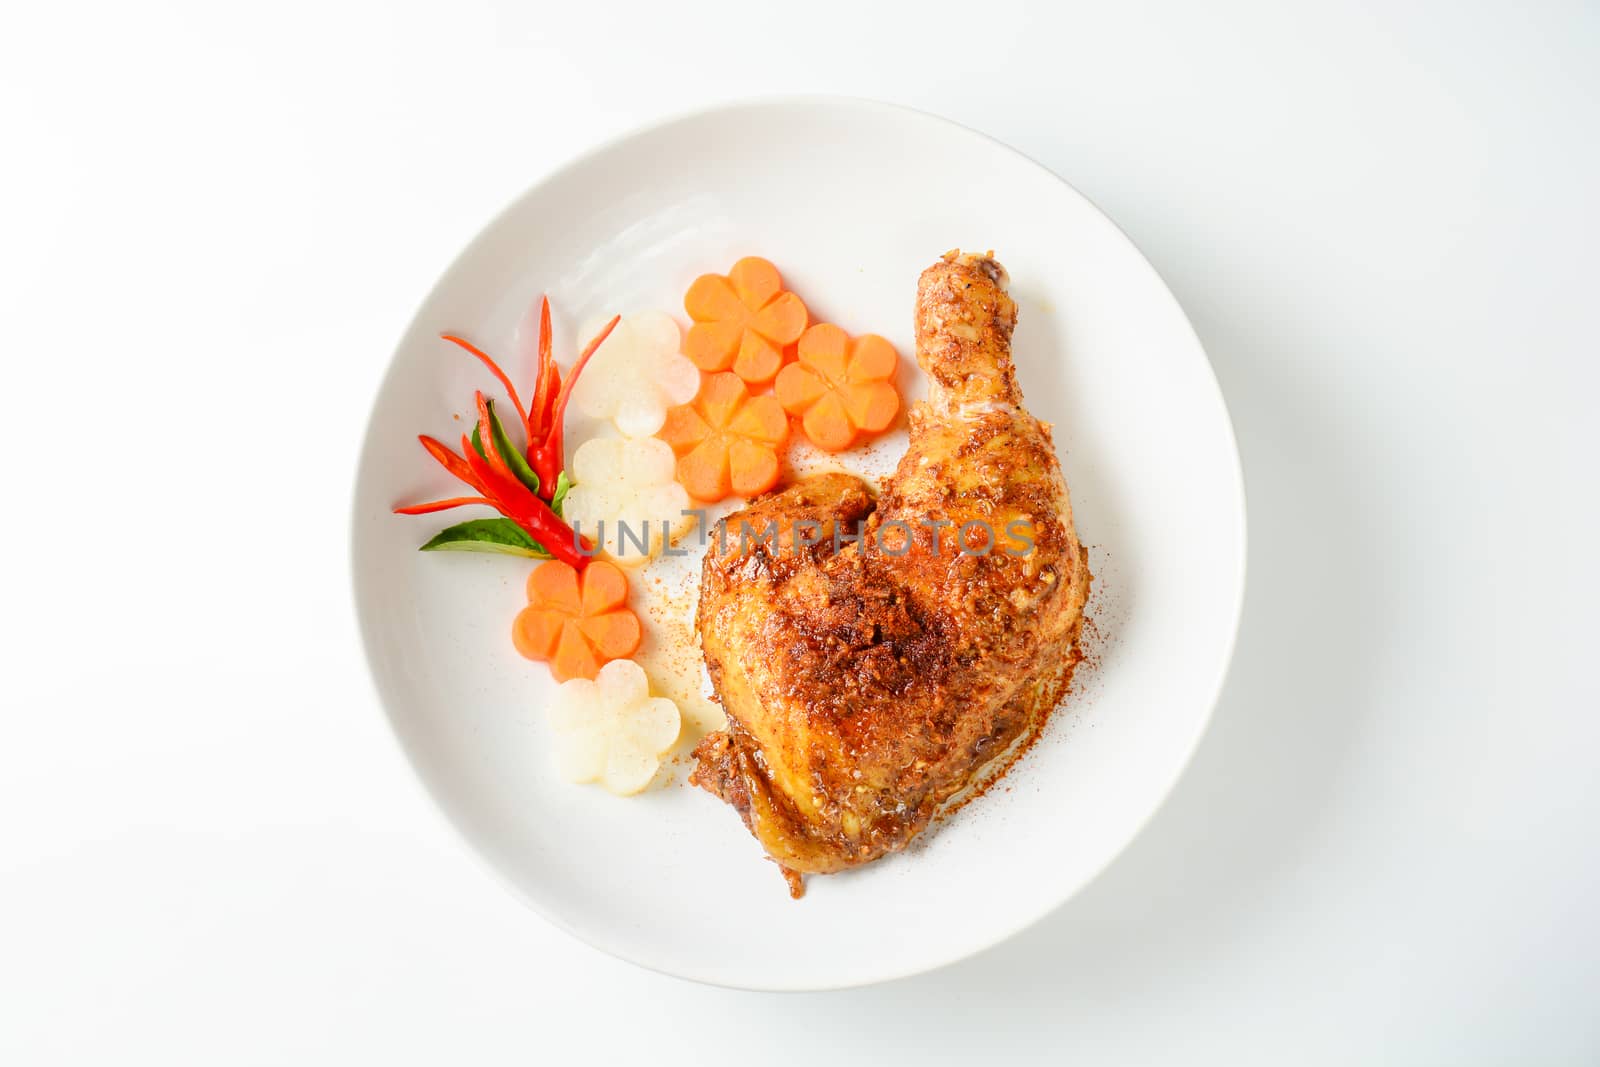 Hot and spicy baked chicken on white plate by yuiyuize